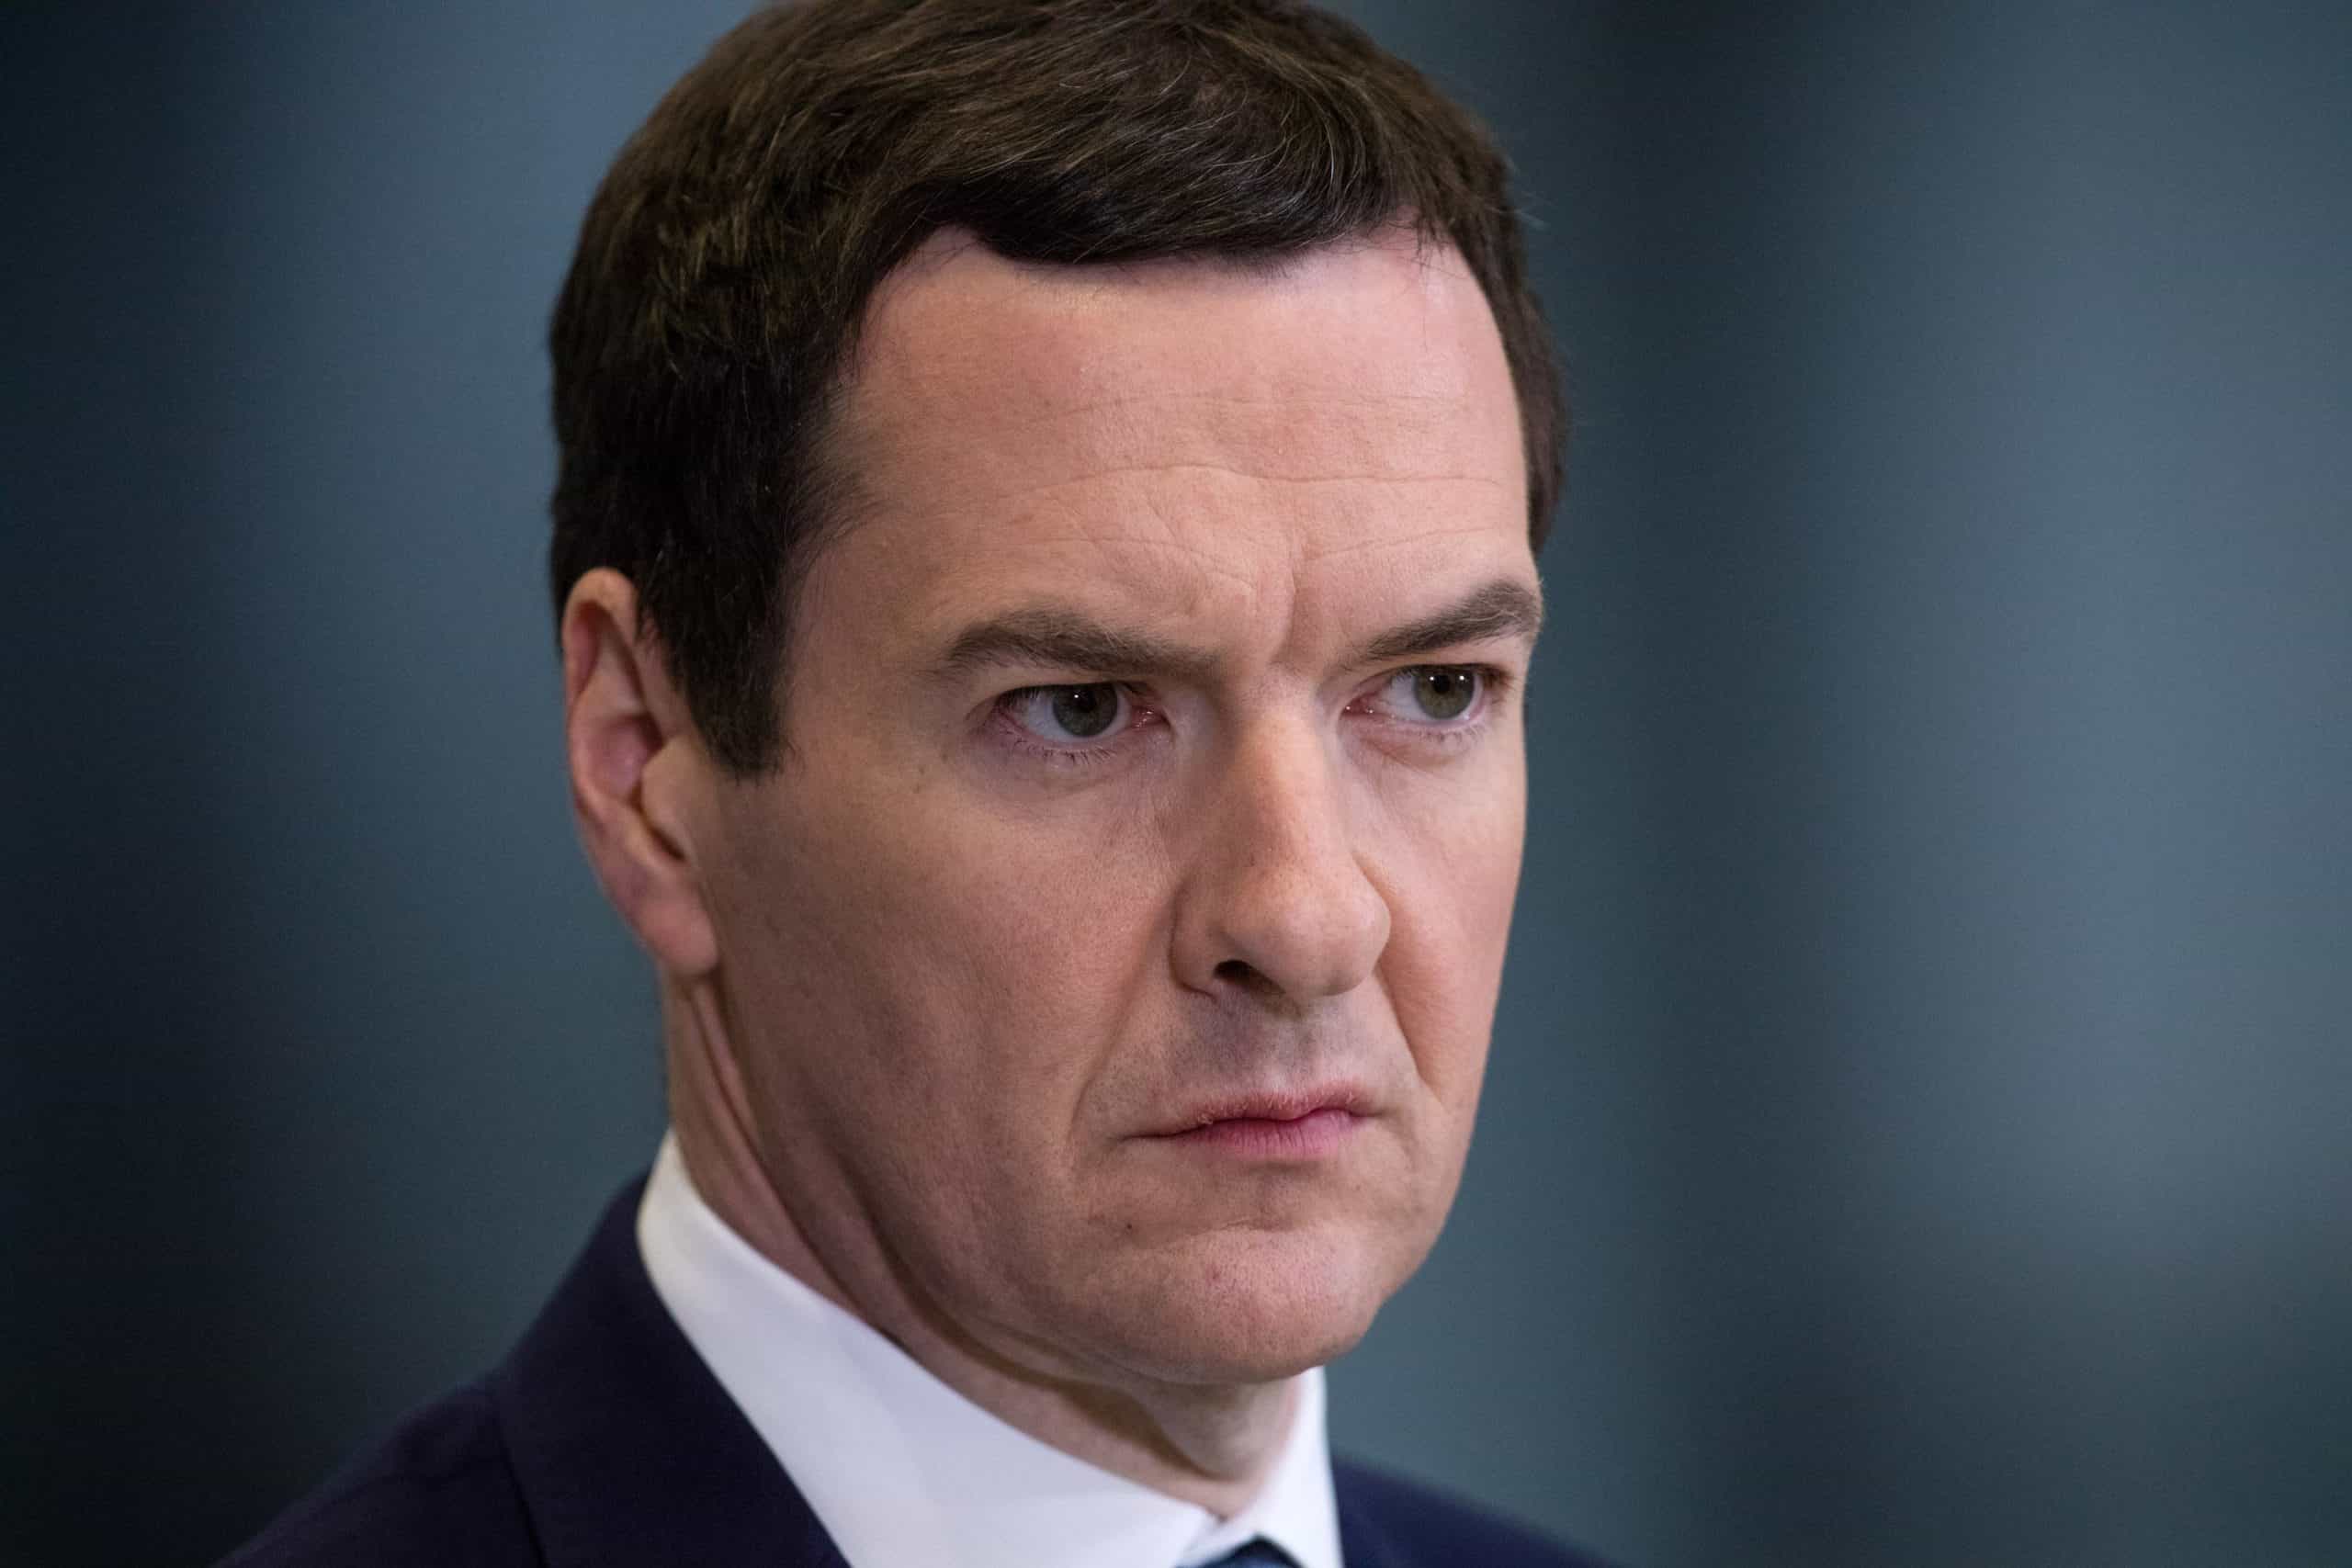 George Osborne plunged UK into austerity due to an ‘error on a spreadsheet’